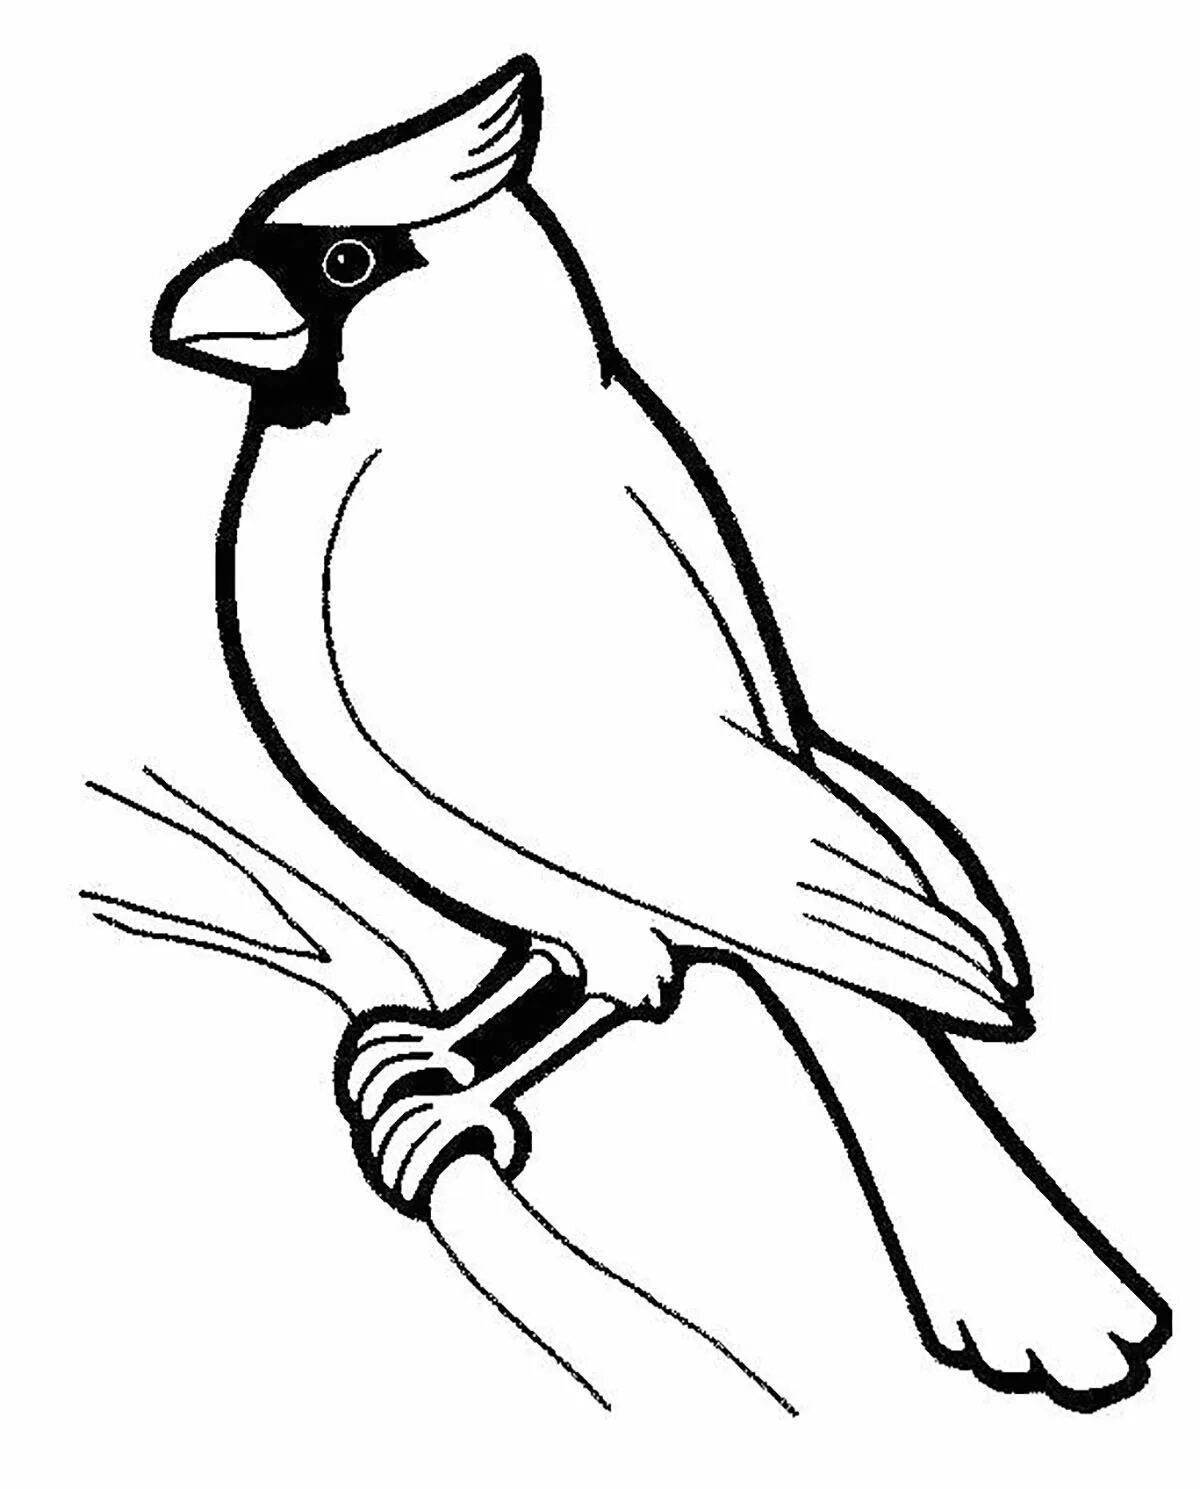 Magic waxwing coloring book for kids